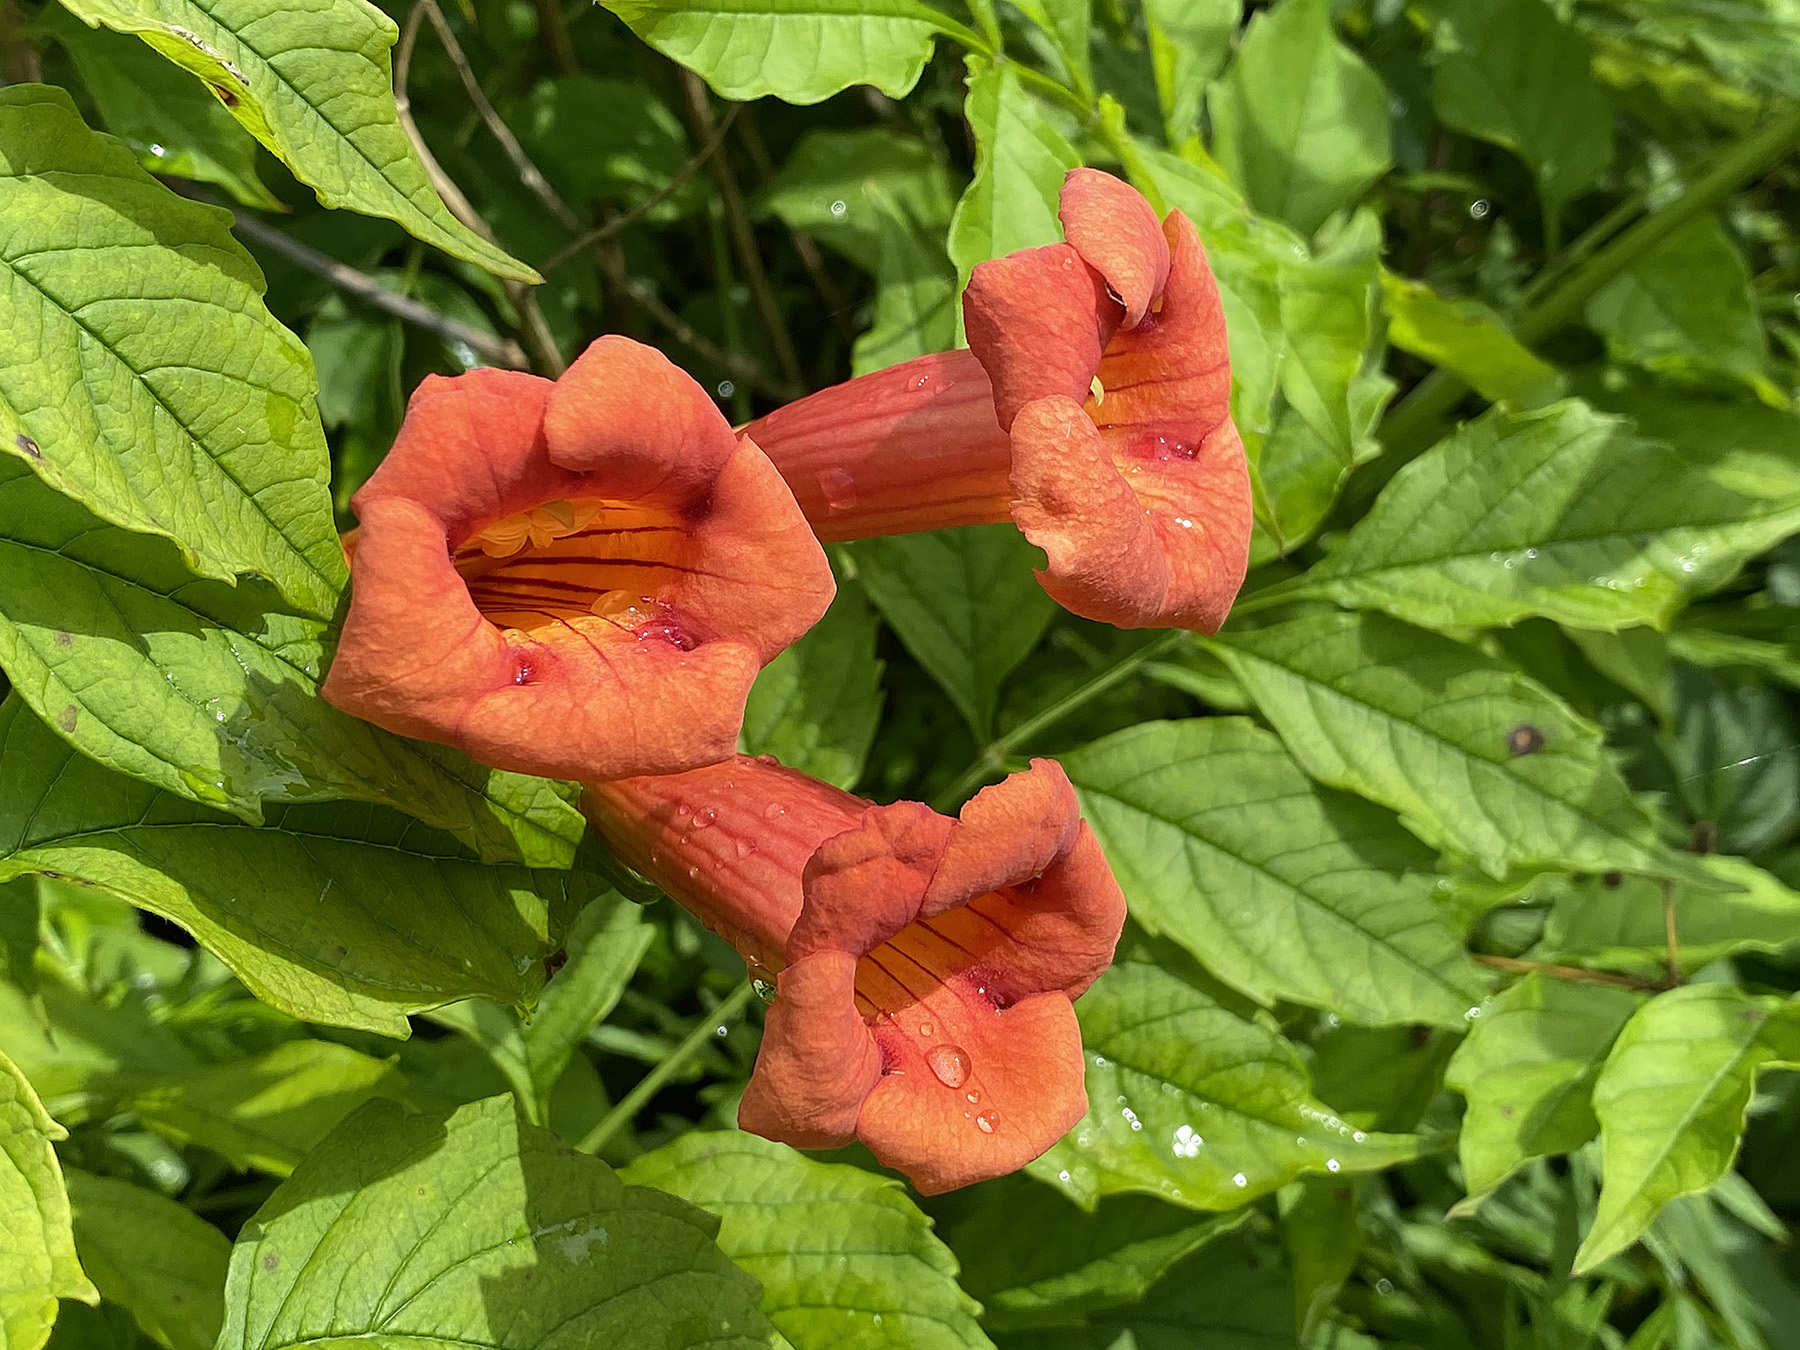 Trumpet creeper (Campsis radicans) is native from Pennsylvania and New